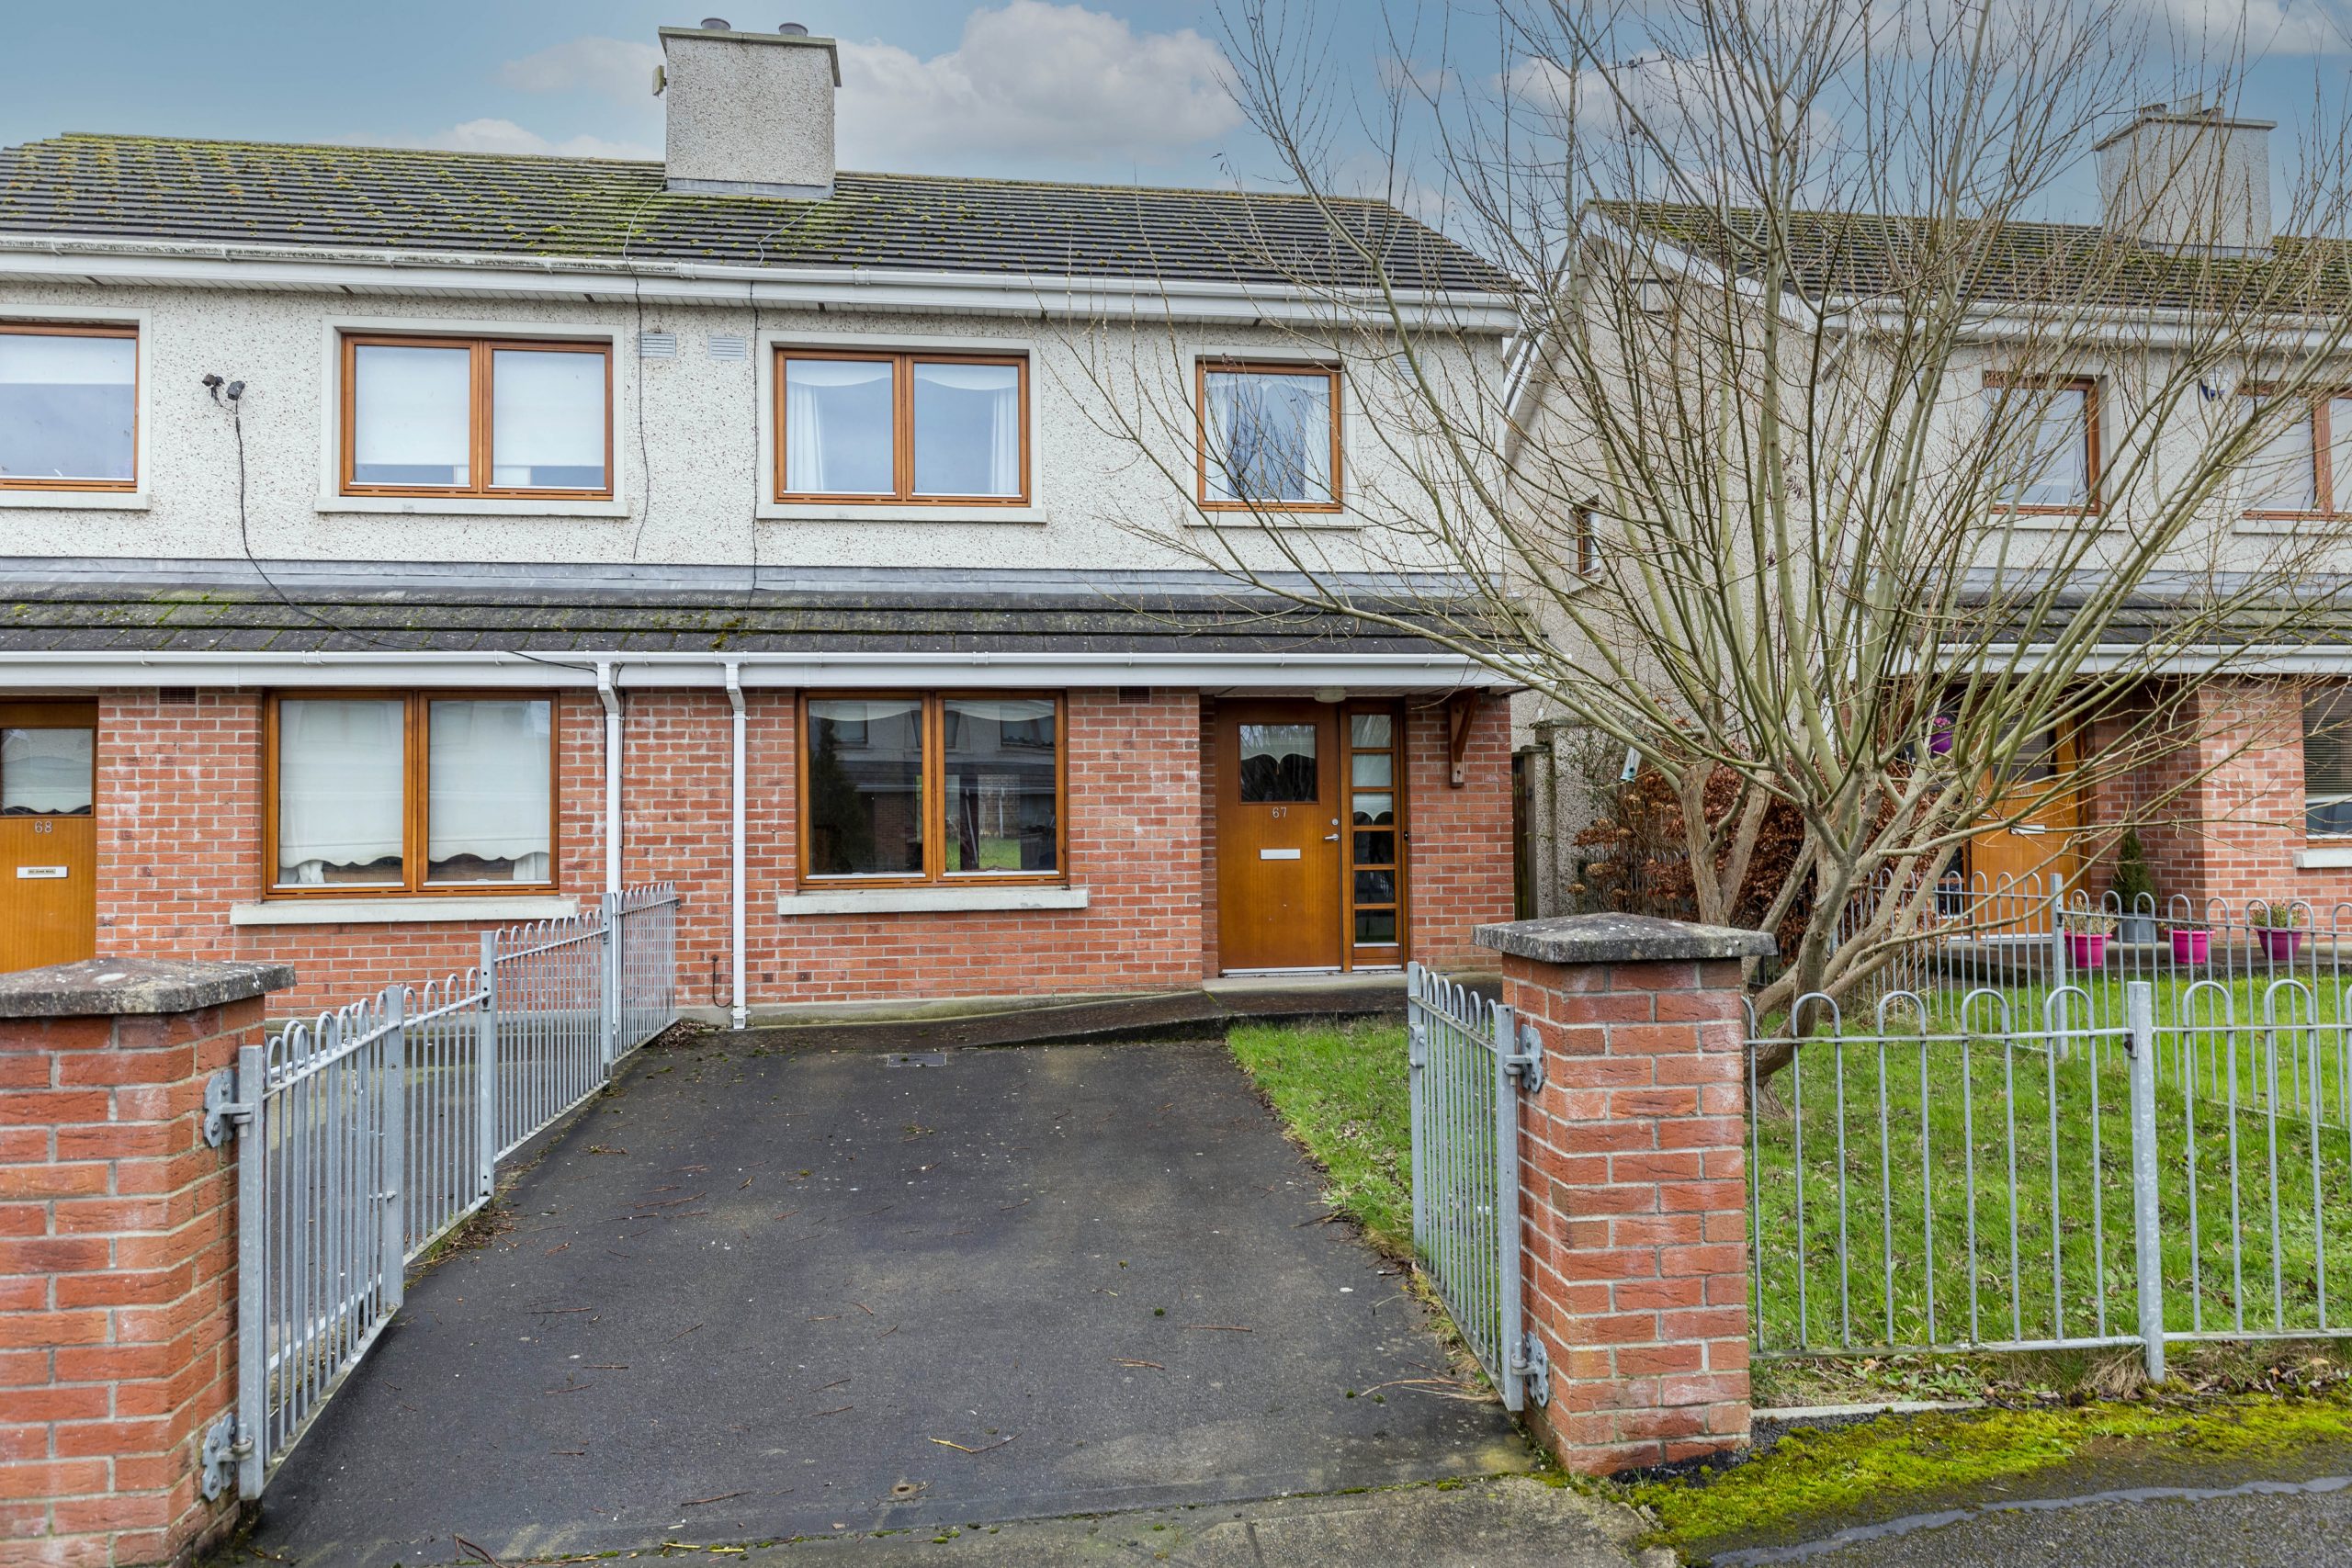 67 Tredagh View Drogheda Co Louth